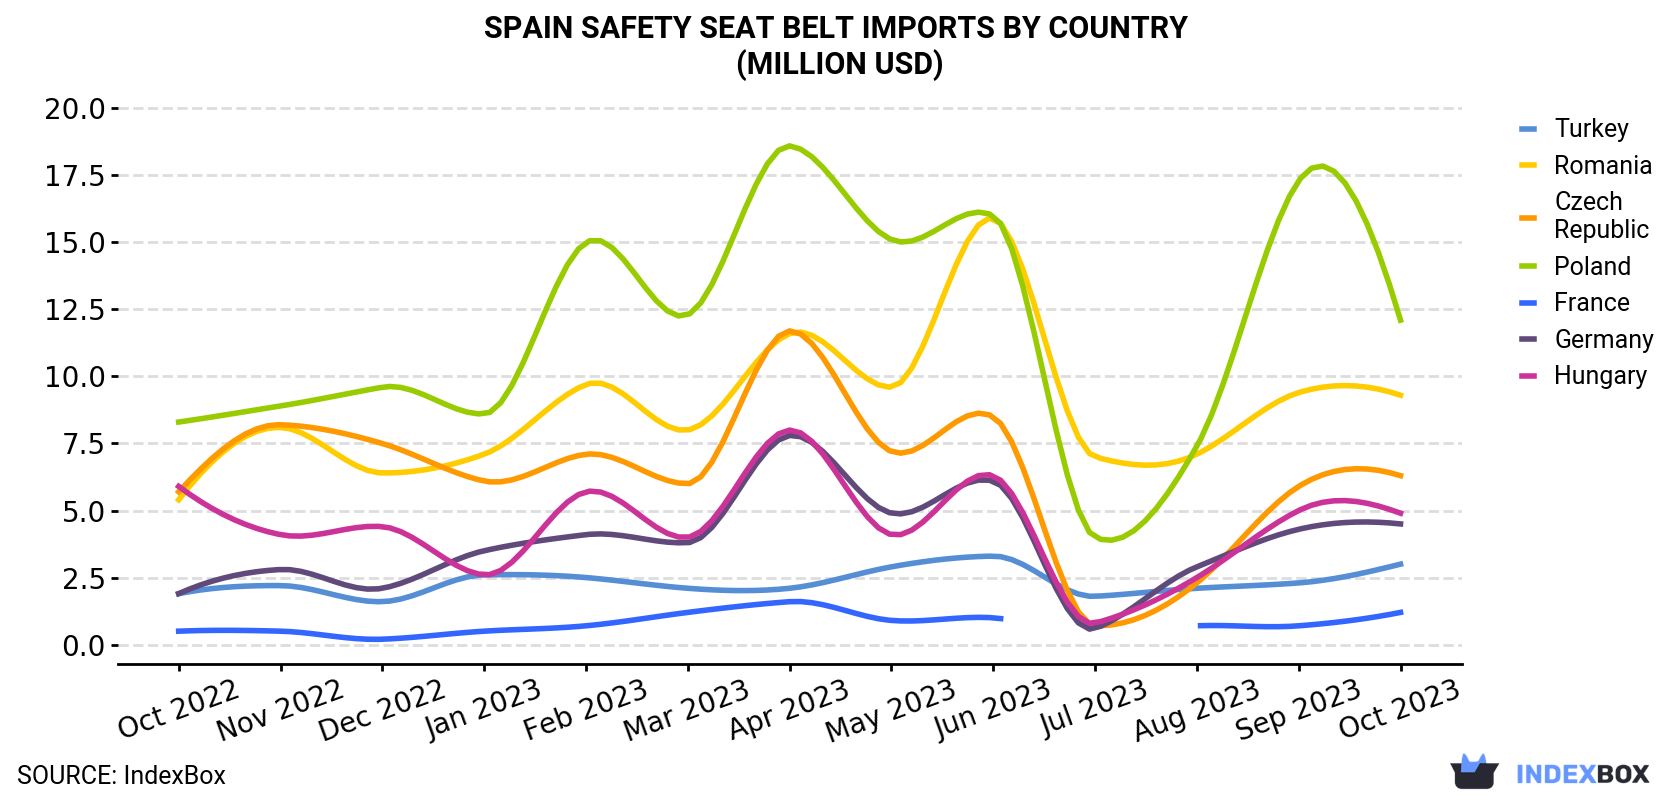 Spain Safety Seat Belt Imports By Country (Million USD)